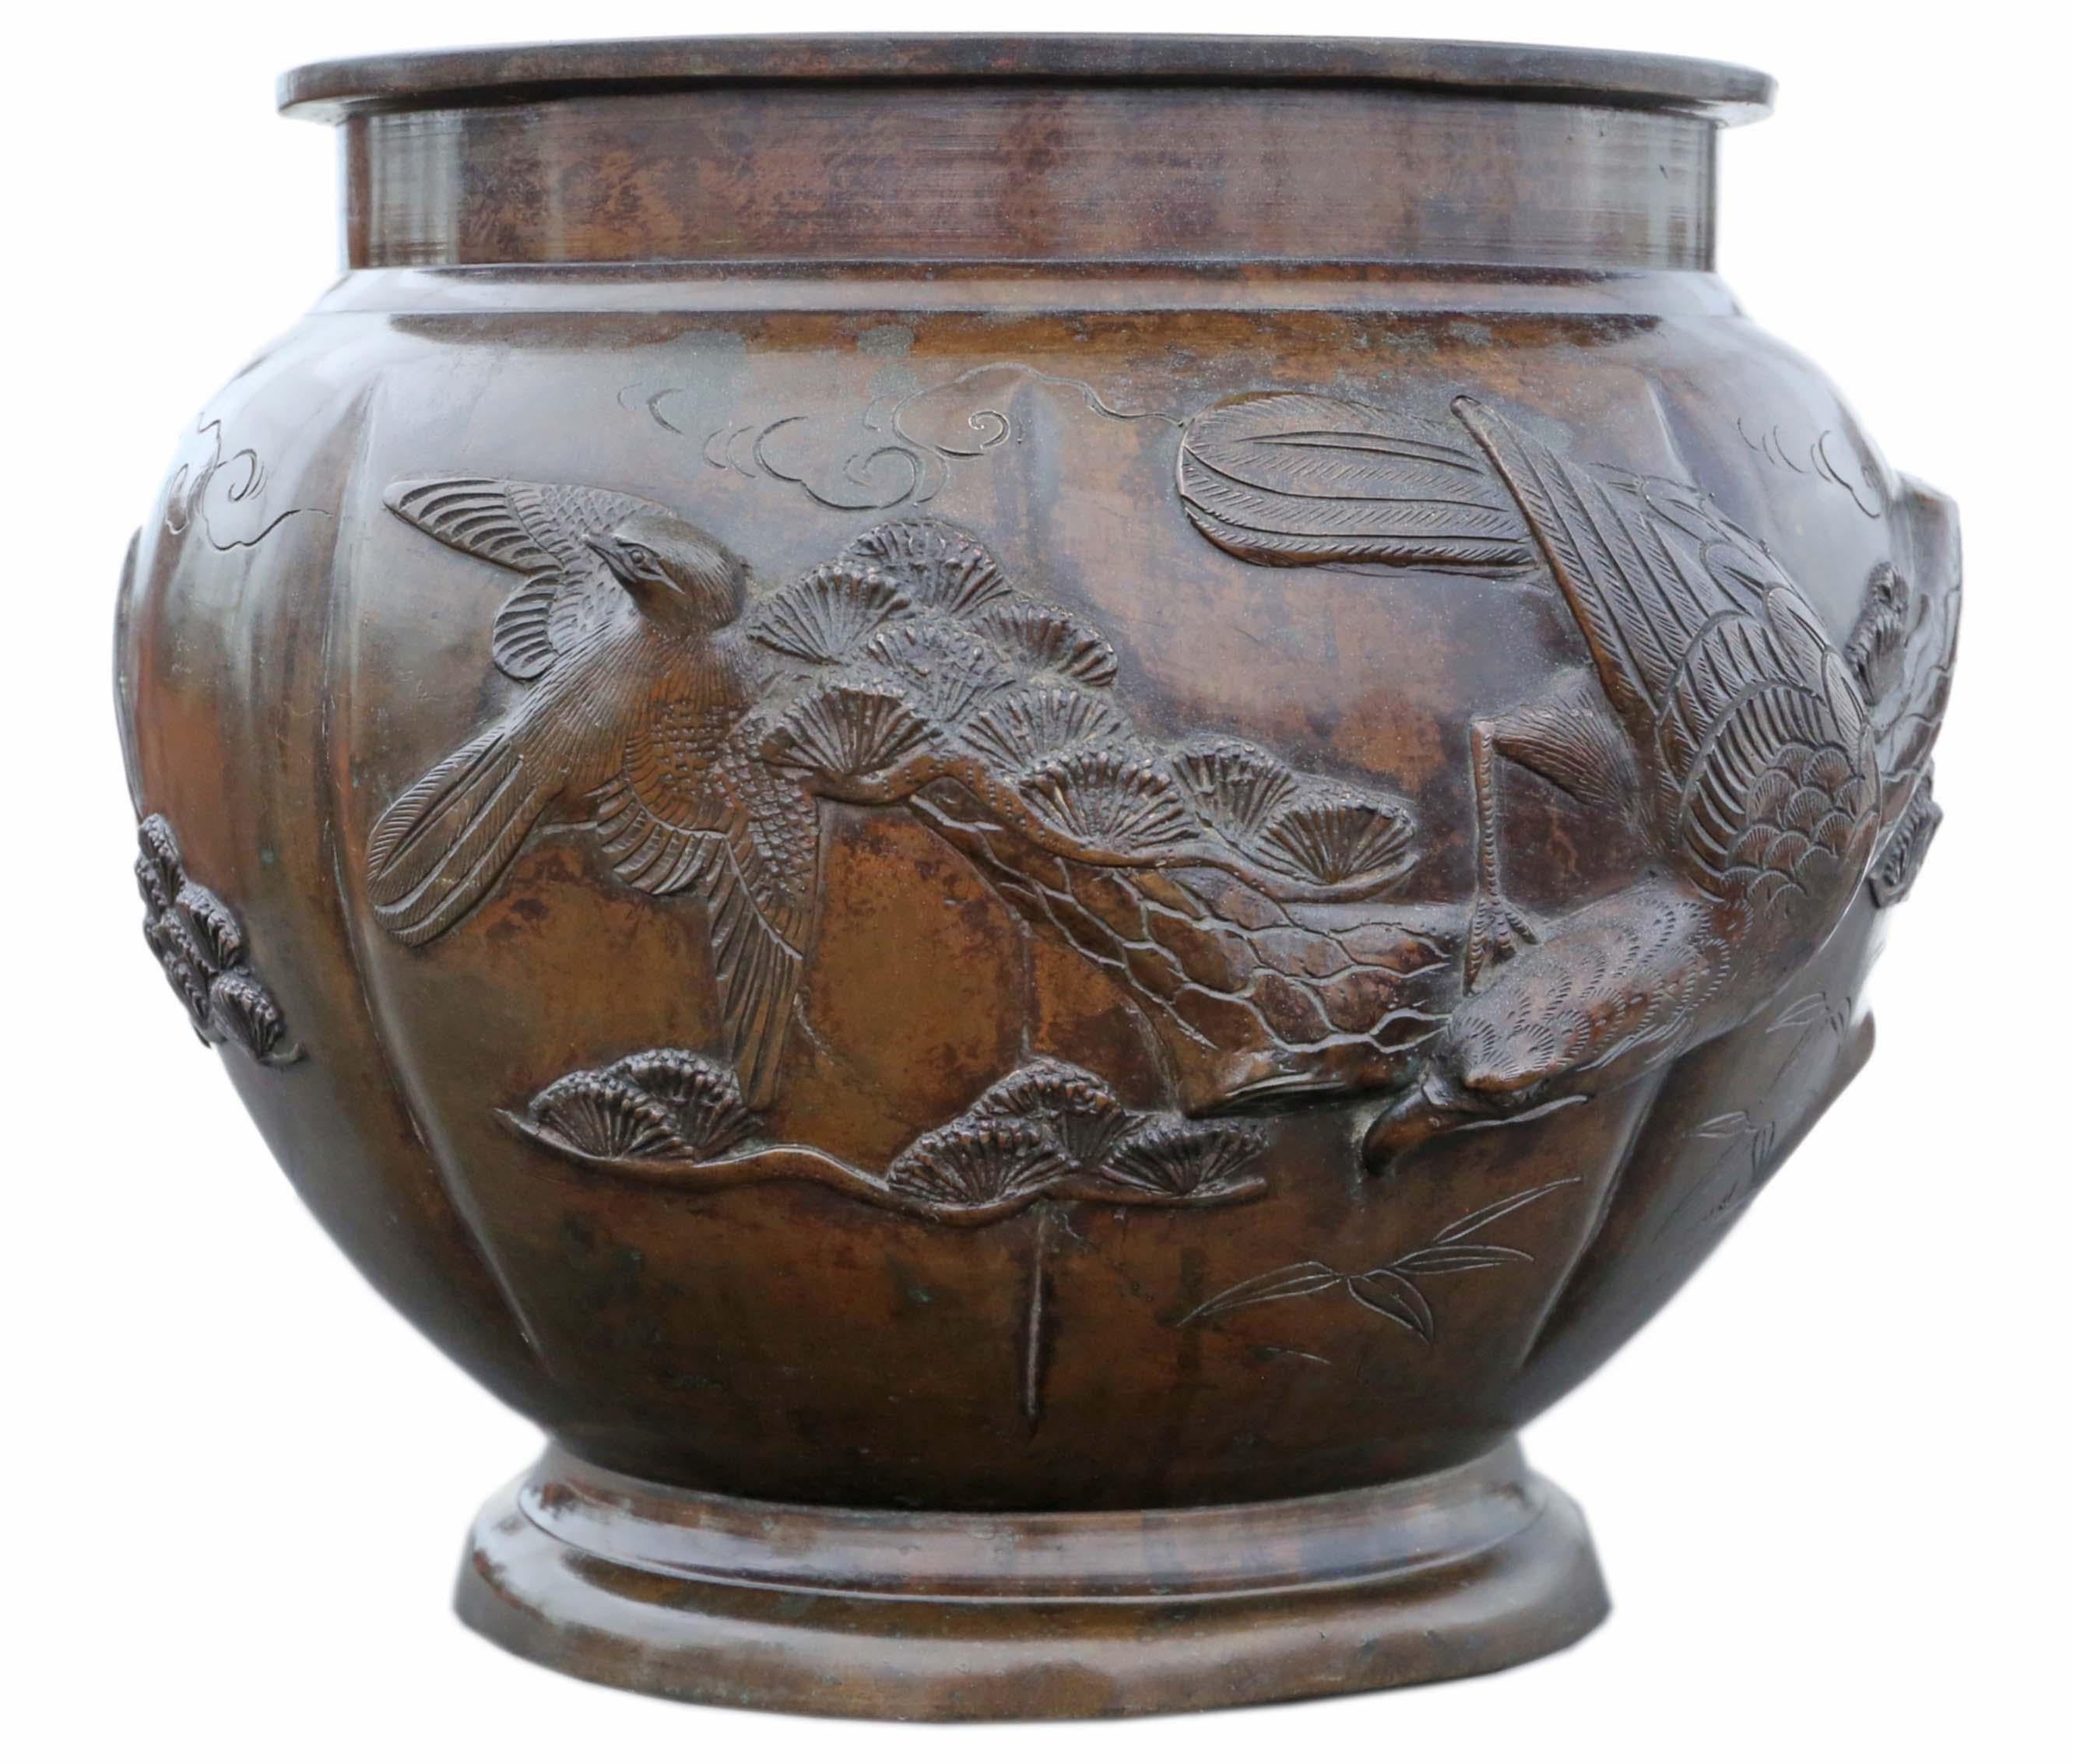 Antique Large Oriental Japanese Bronze Jardinière Planter Bowl Censor - Exquisite Meiji Period Piece!

This stunning bronze jardinière planter bowl, originating from the 19th Century Meiji Period, is a testament to Japanese artistry and elegance.